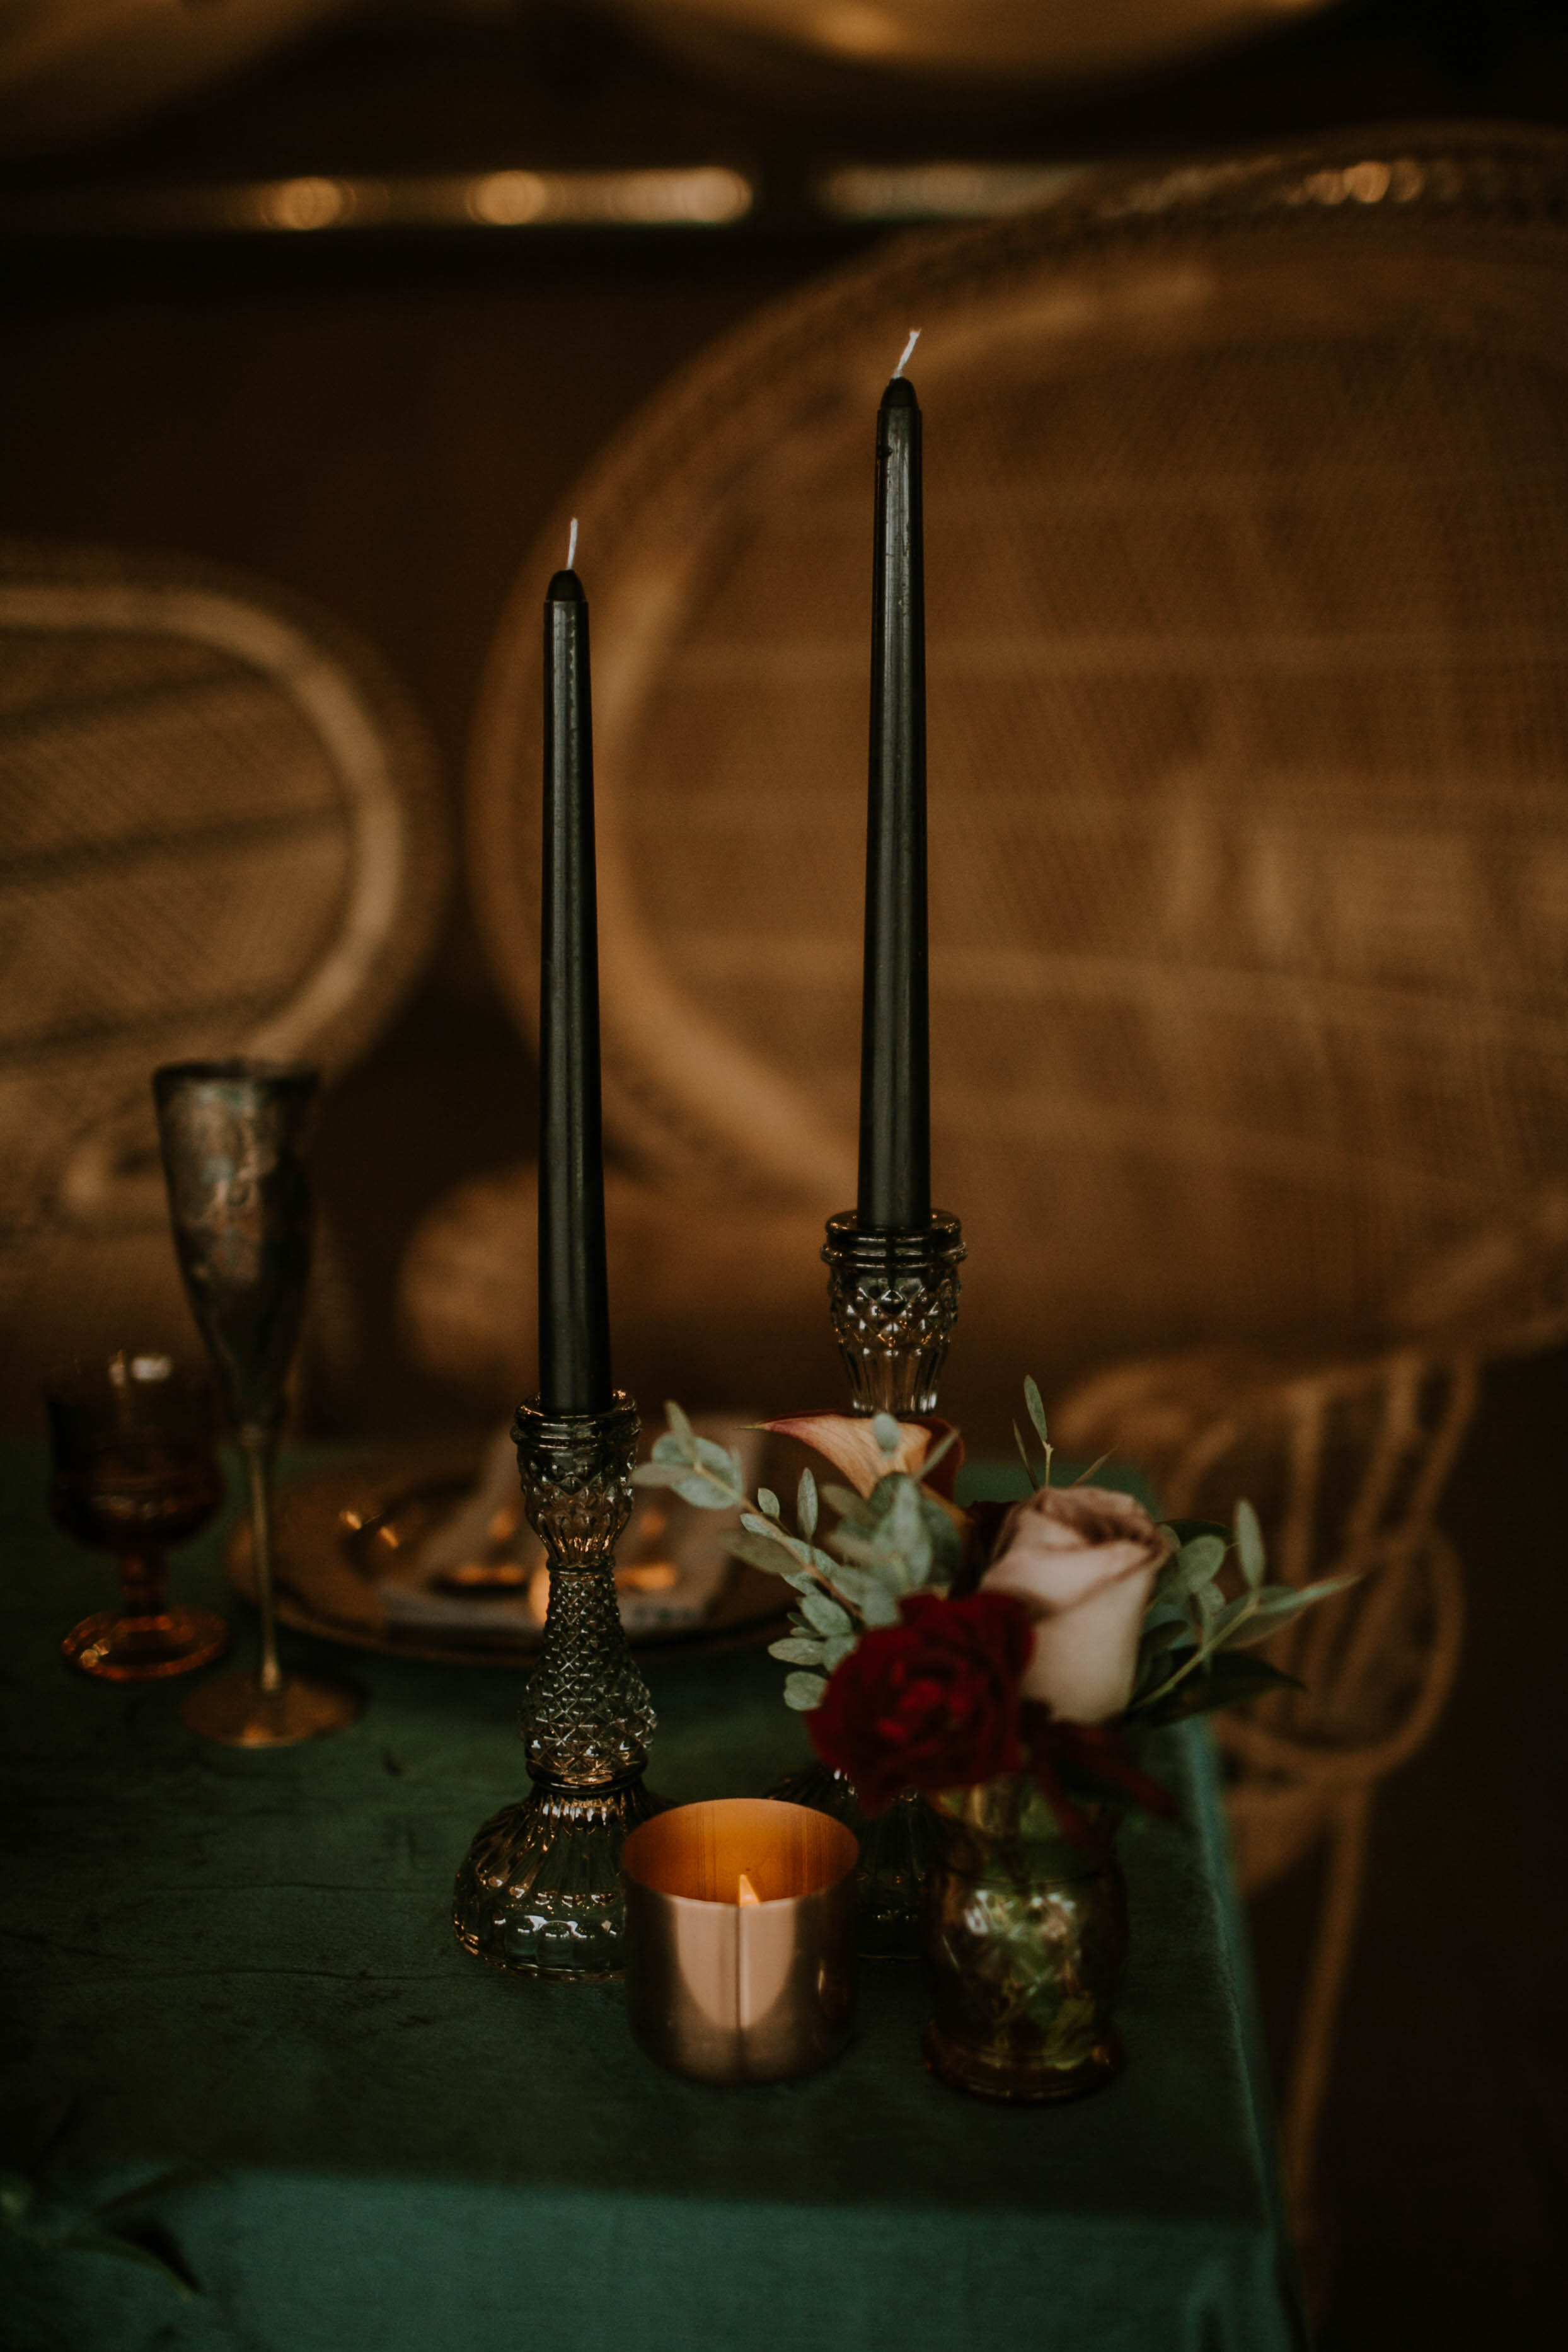 Black candles wedding decor: Moody Fall Wedding Styled Shoot captured by Gabrielle Daylor Photography. See more fall wedding ideas at CHItheeWED.com!